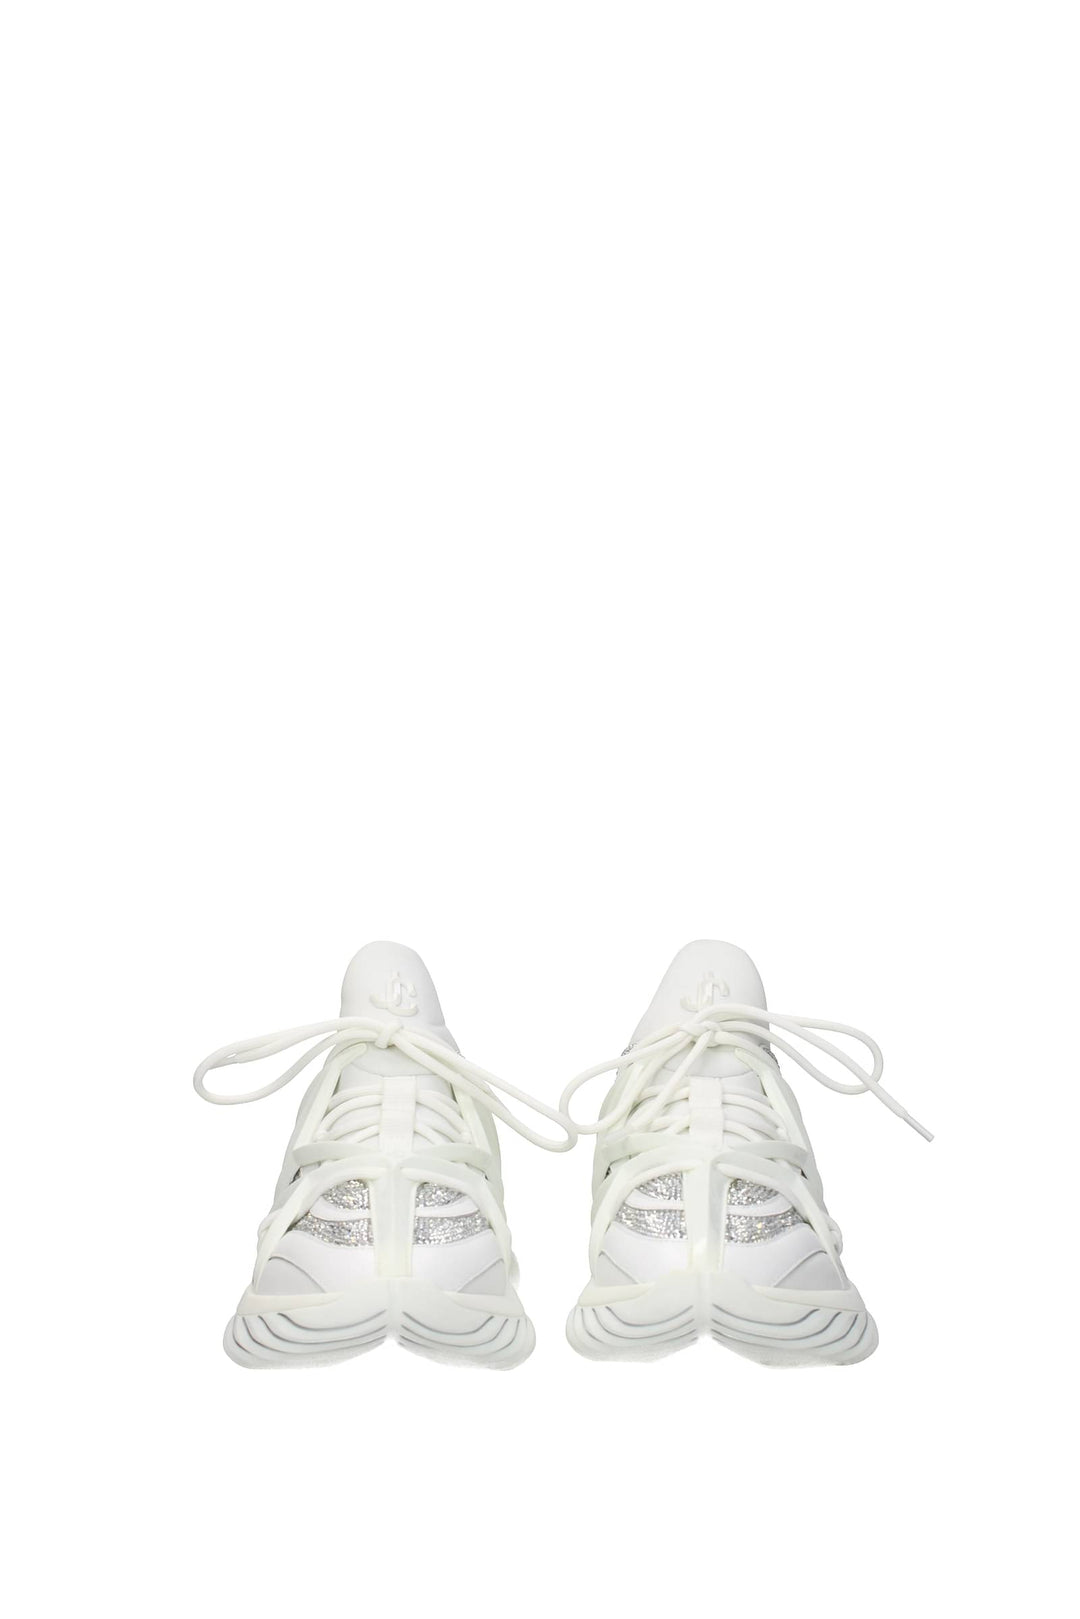 Sneakers Cosmos Tessuto Bianco Argento - Jimmy Choo - Donna